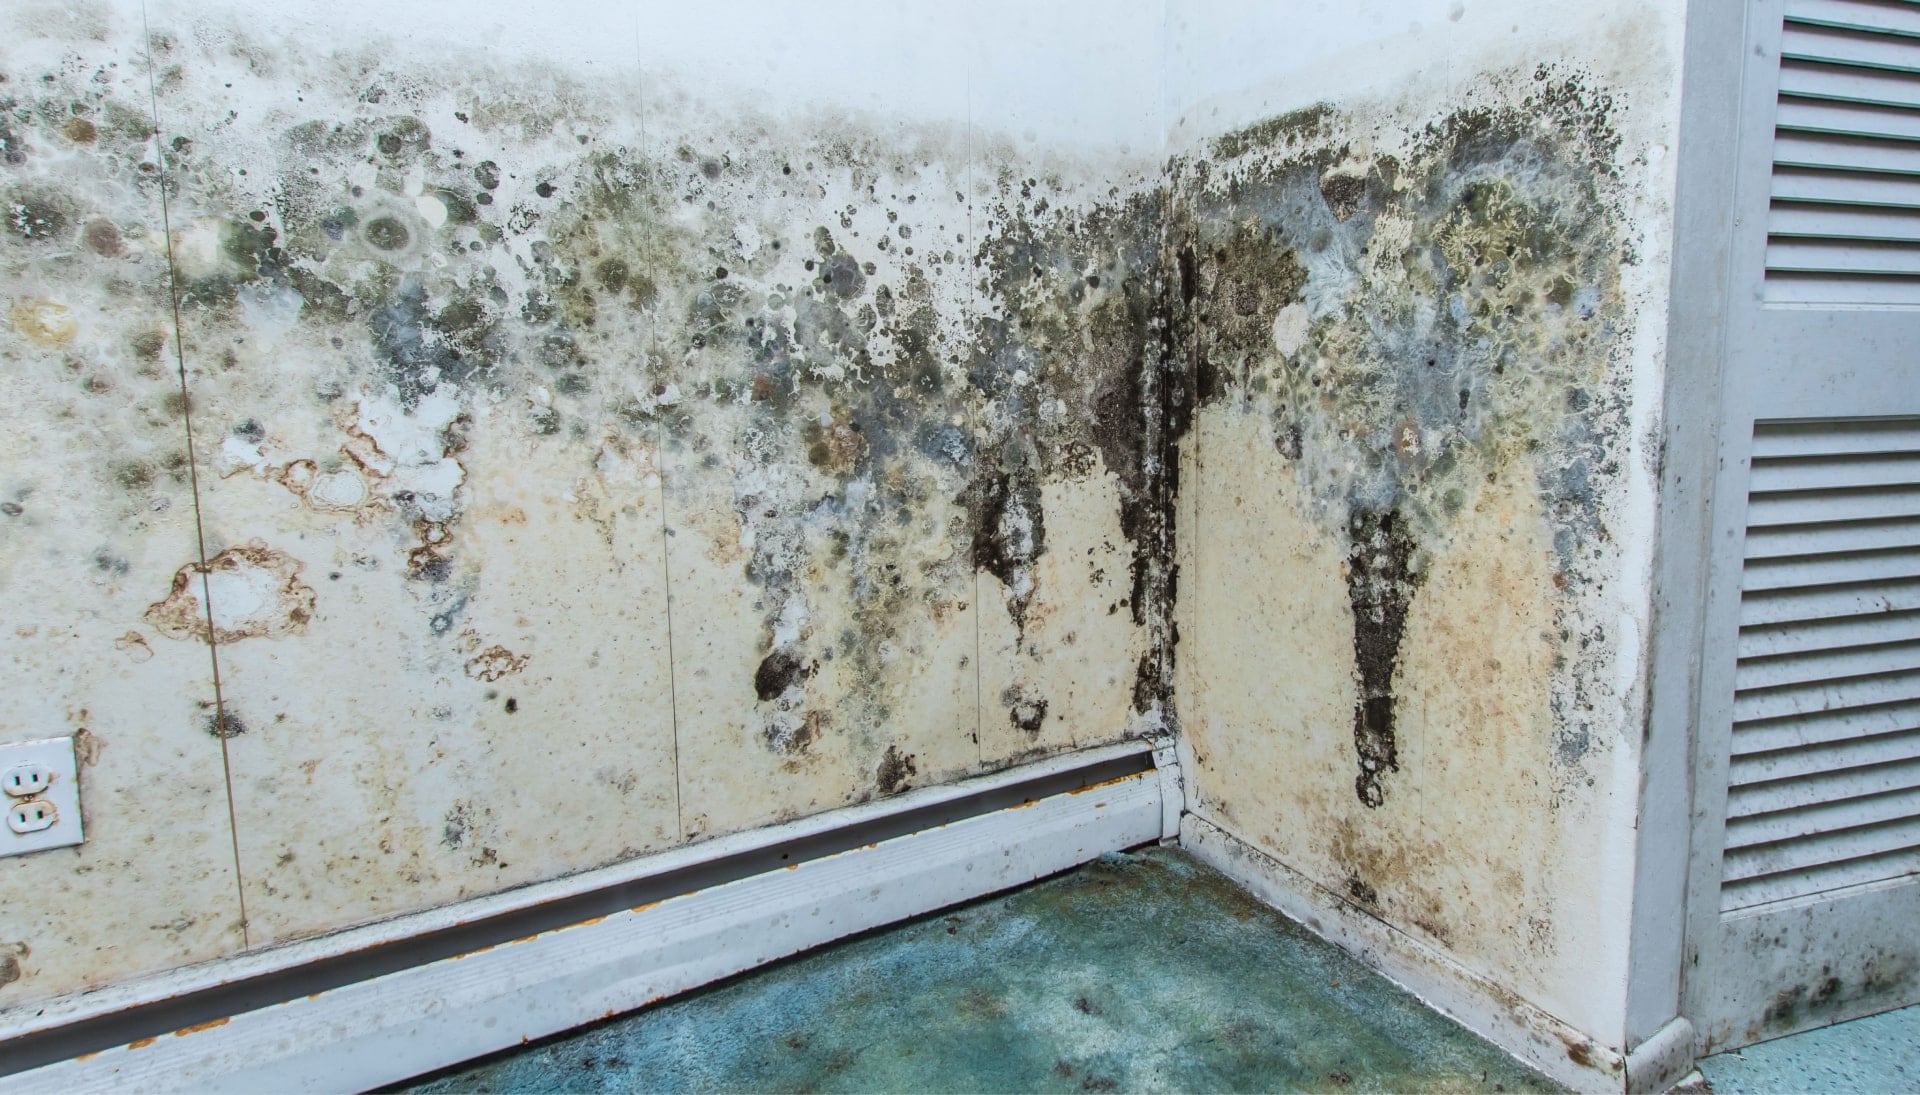 A mold remediation team using specialized techniques to remove mold damage and control odors in a Omaha property, with a focus on safety and efficiency